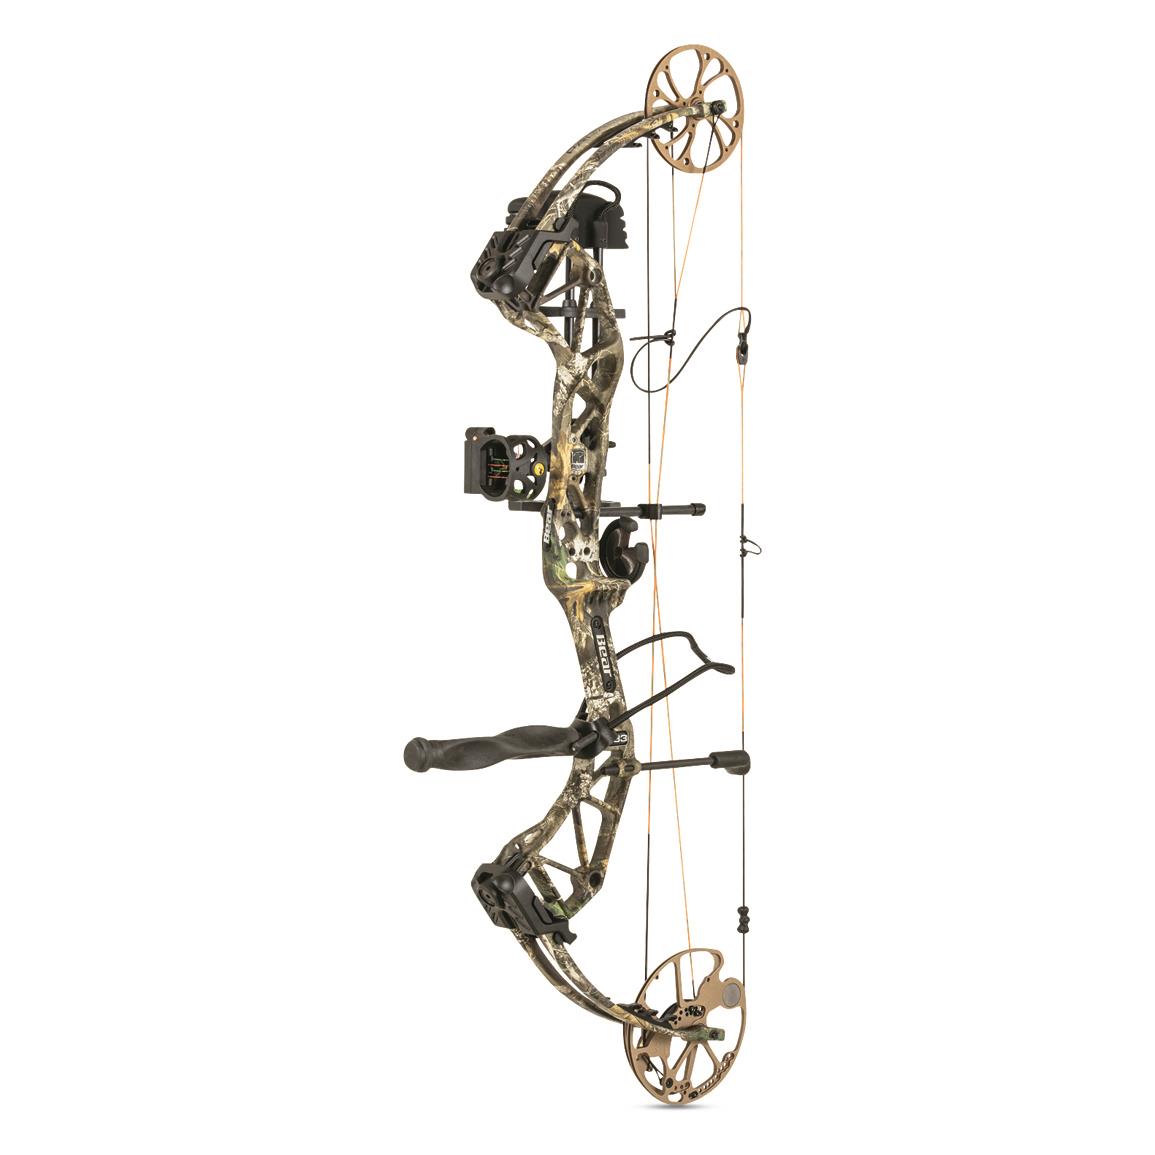 Bear Archery Paradox Ready-to-Hunt Compound Bow Package, Right Hand, 55-70 lbs., Realtree EDGE™